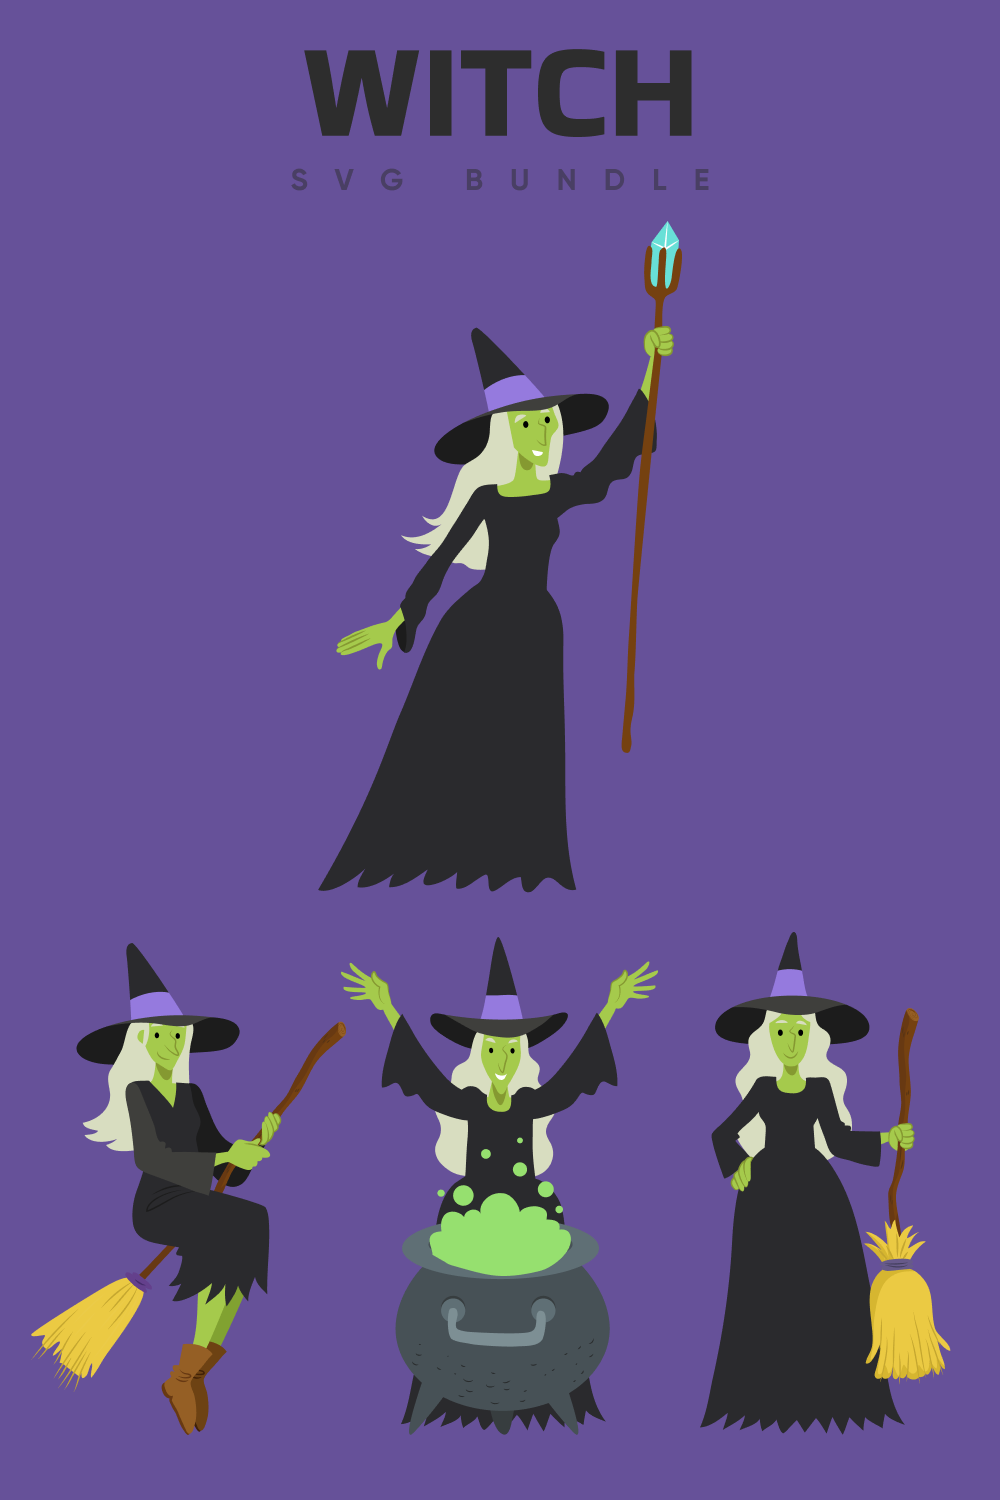 Some witch options.